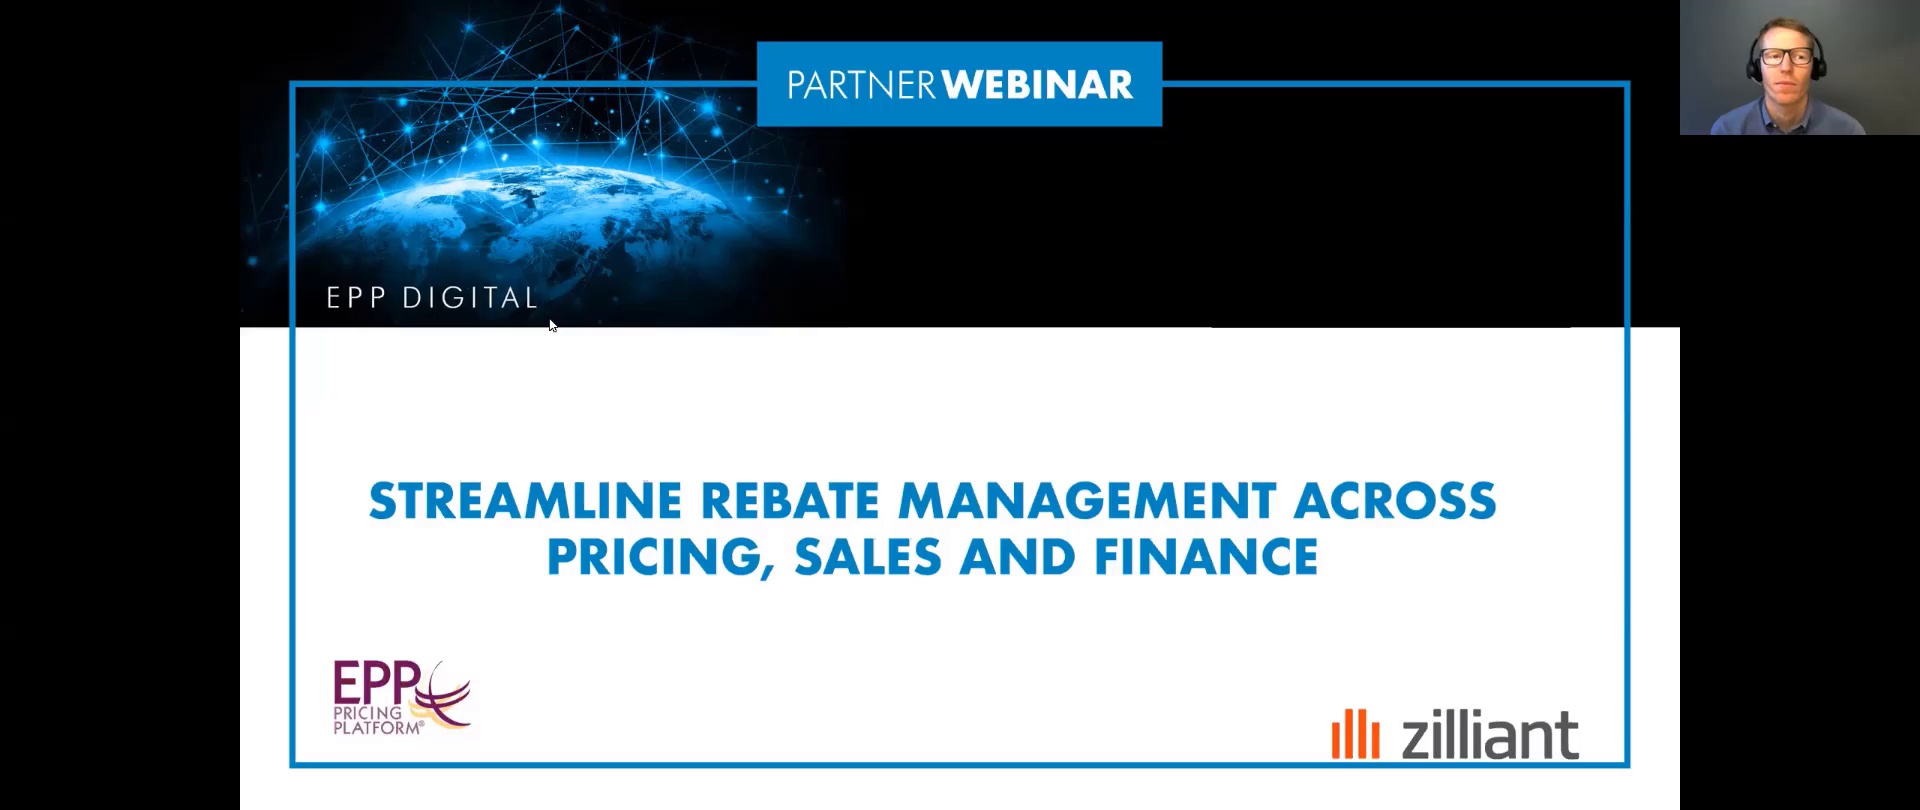 Streamline Rebate Management across Pricing, Sales and Finance